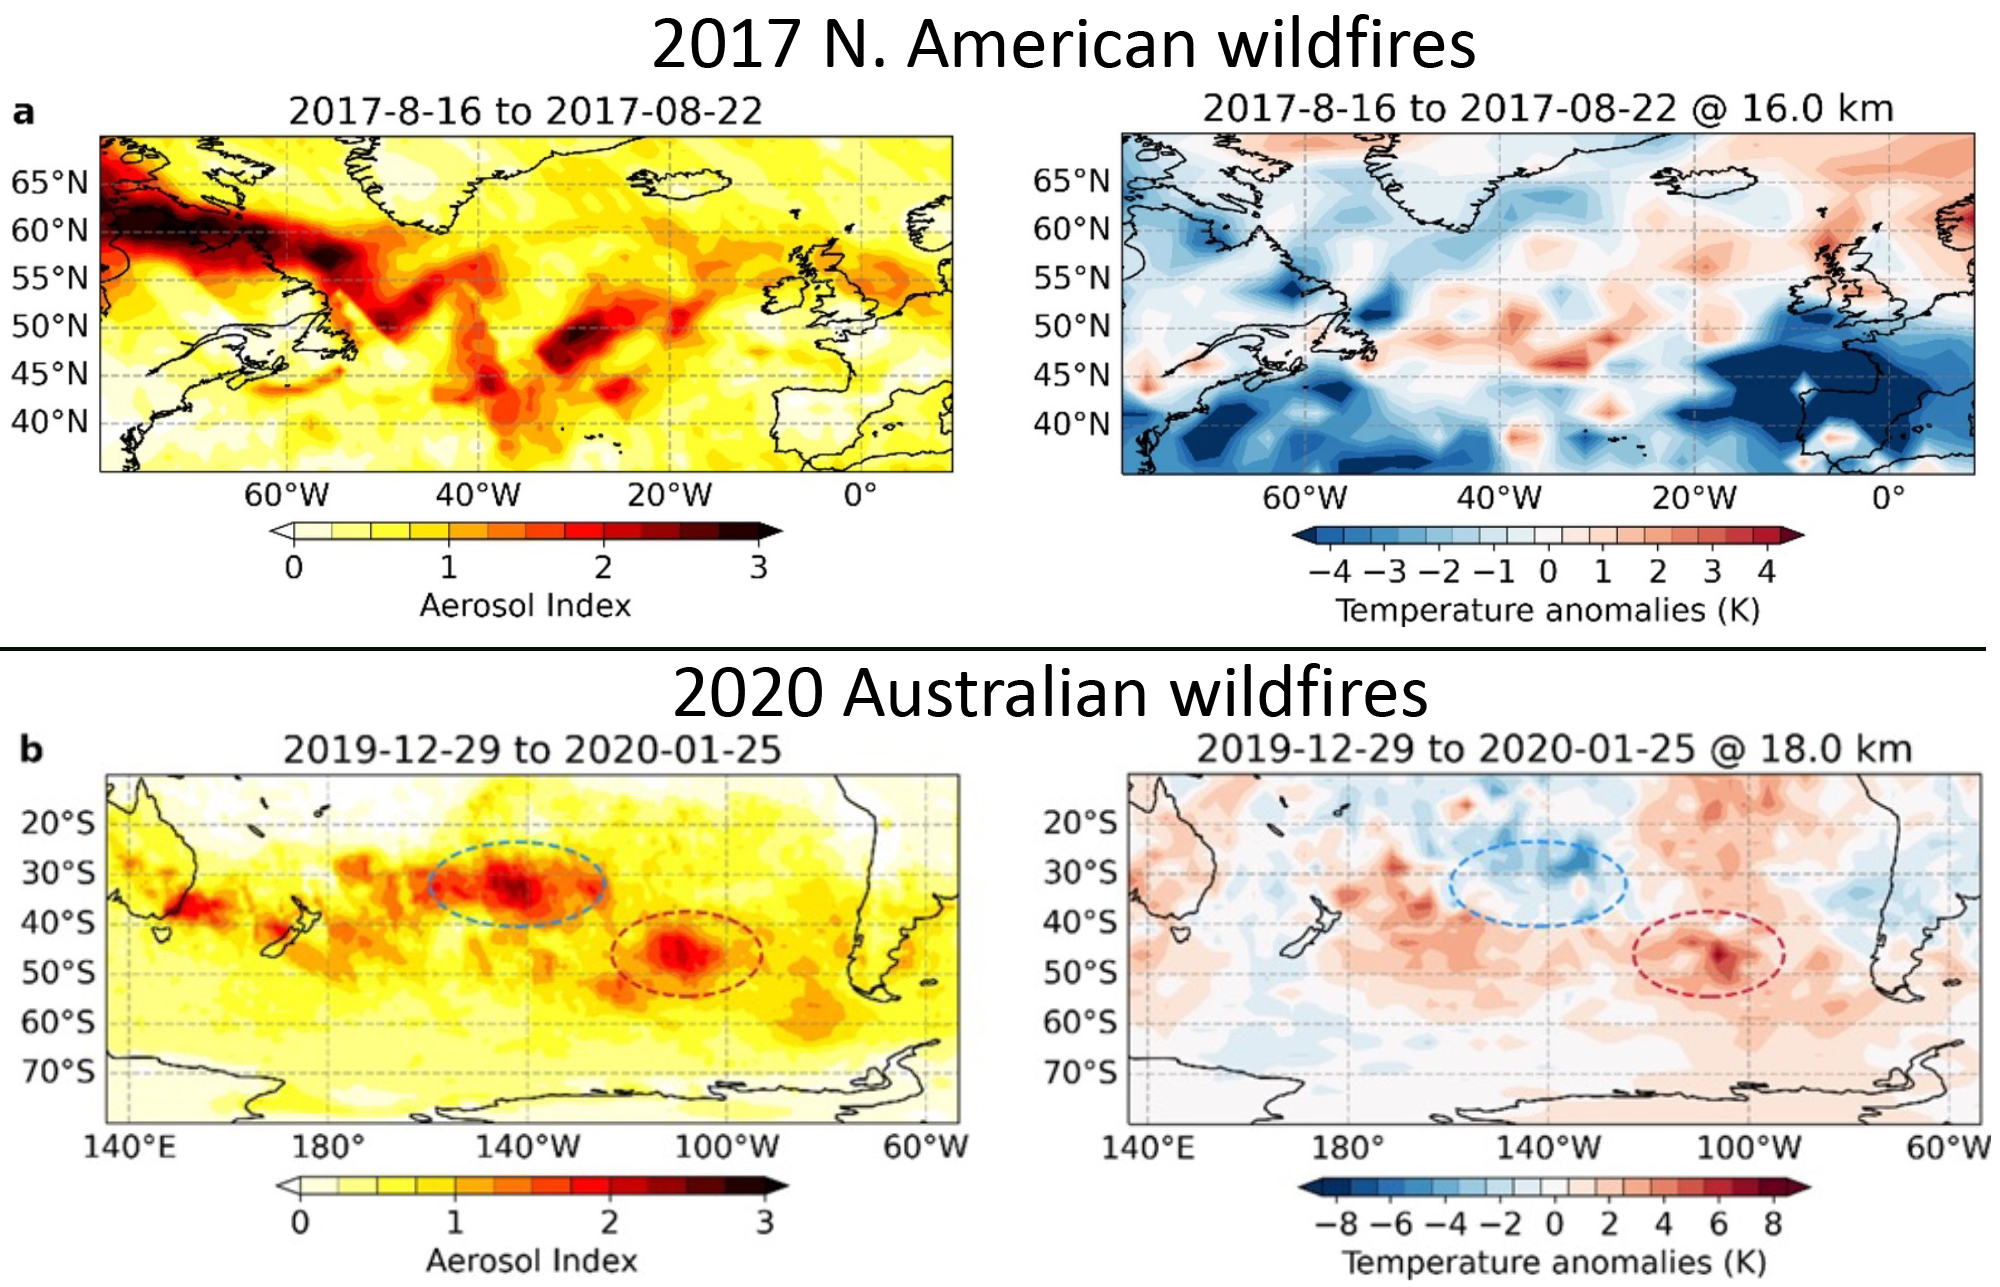 Regional temperature anomalies shortly after the wildfire events